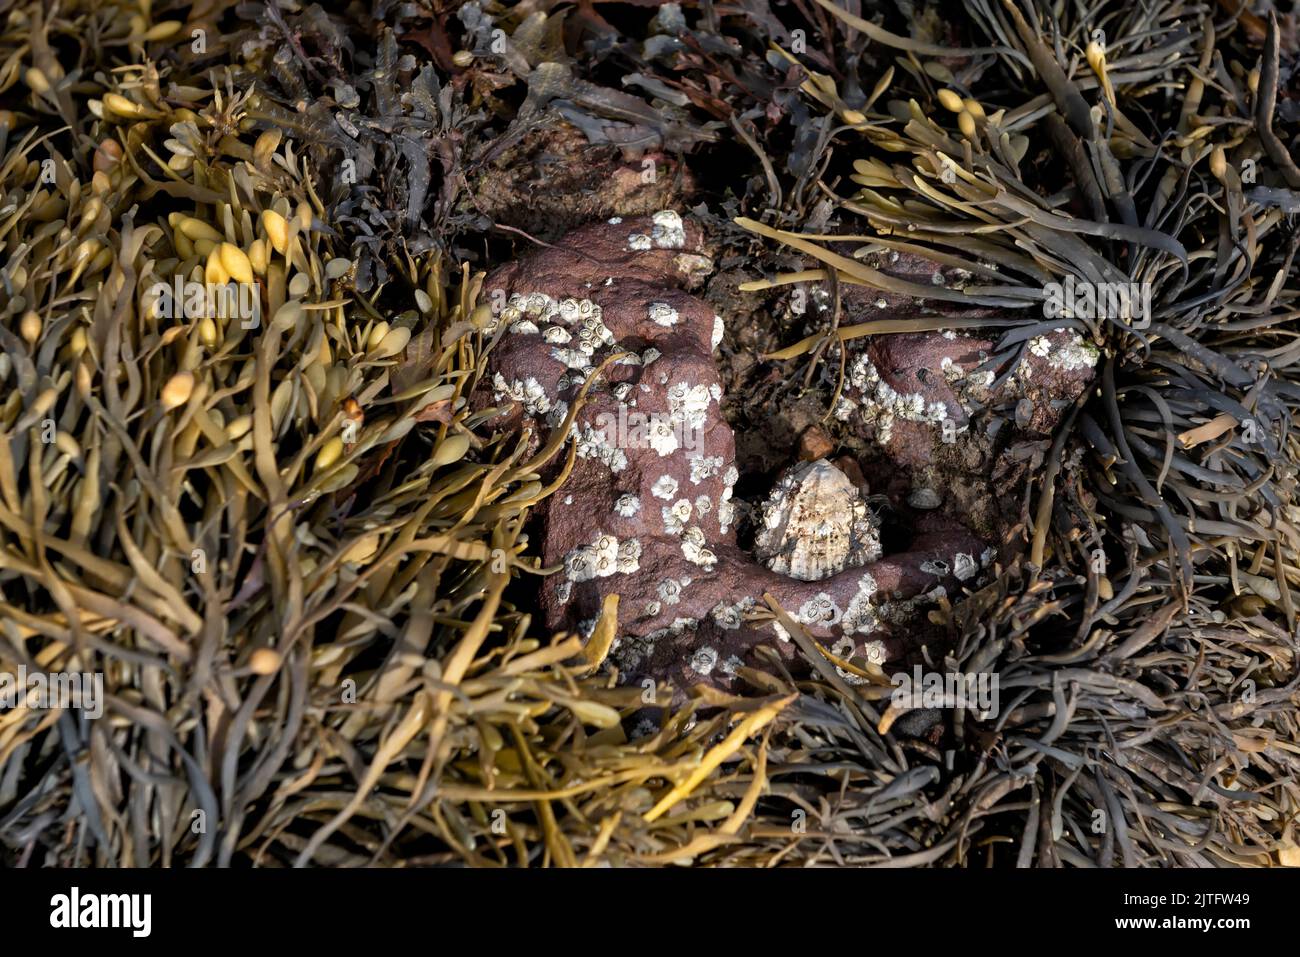 Common limpet sea snail surrounded by Egg wrack seaweed Stock Photo